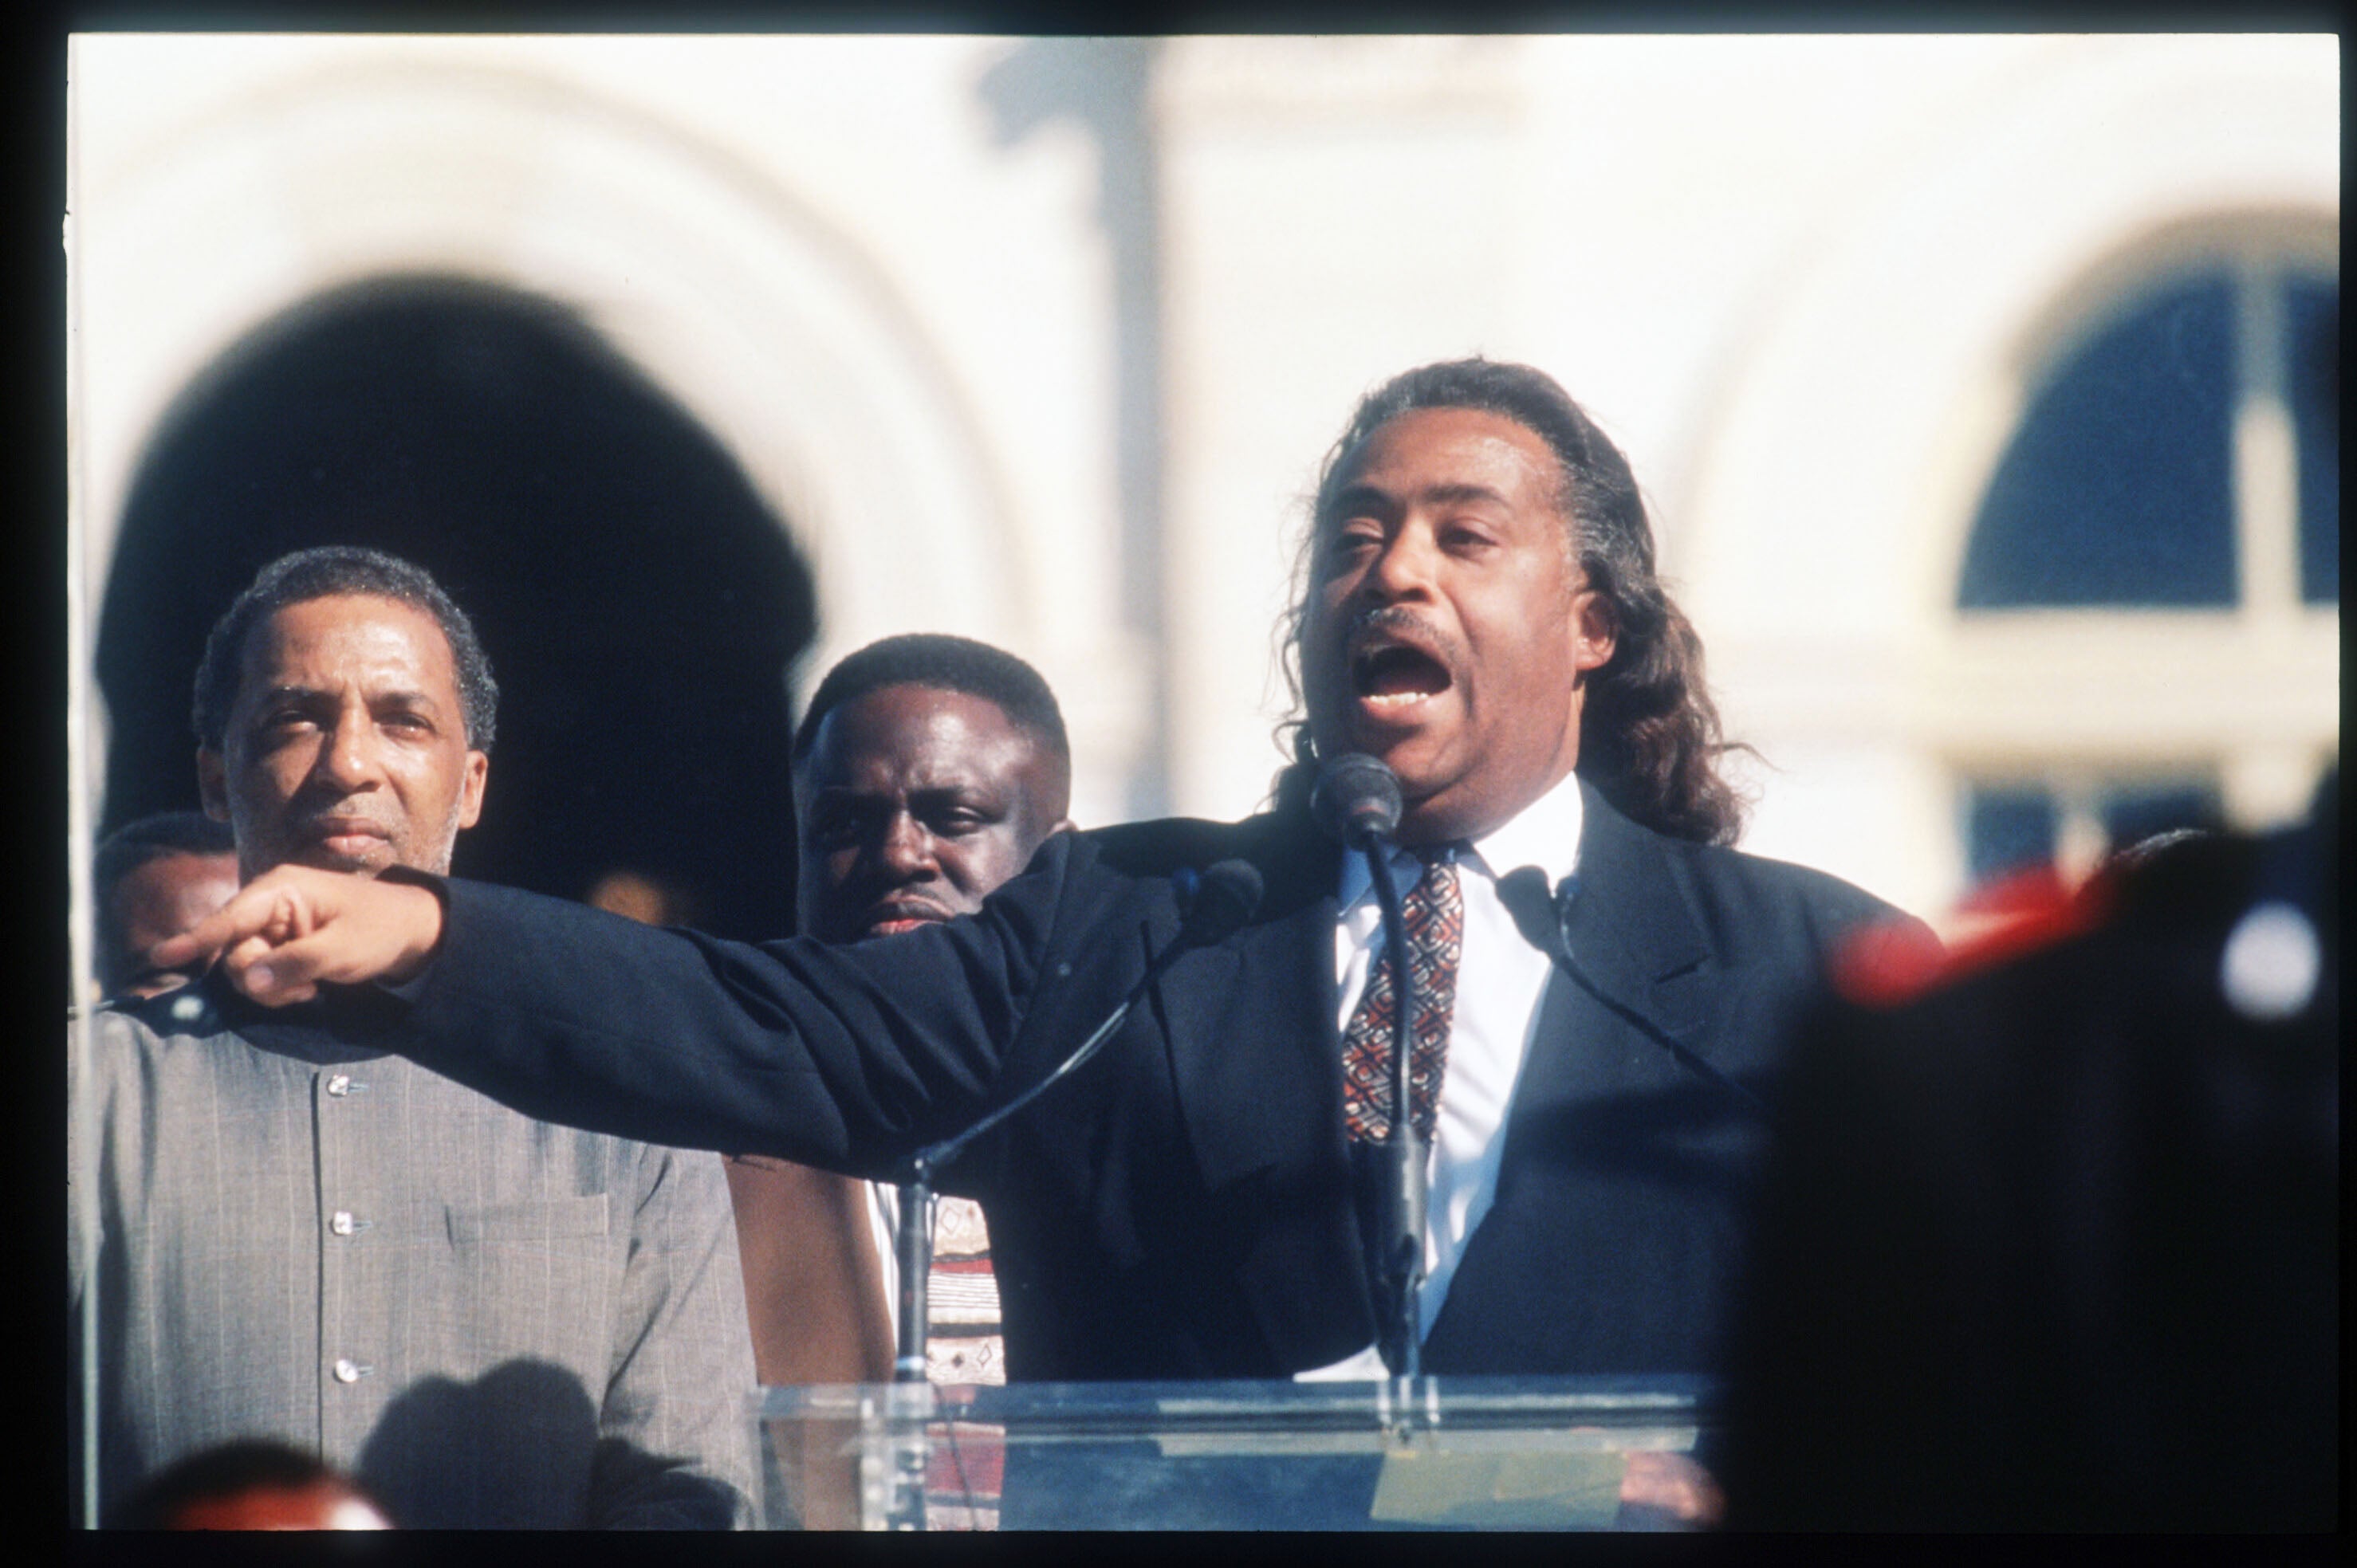 A Look Back: The 20th Anniversary of the Million Man March